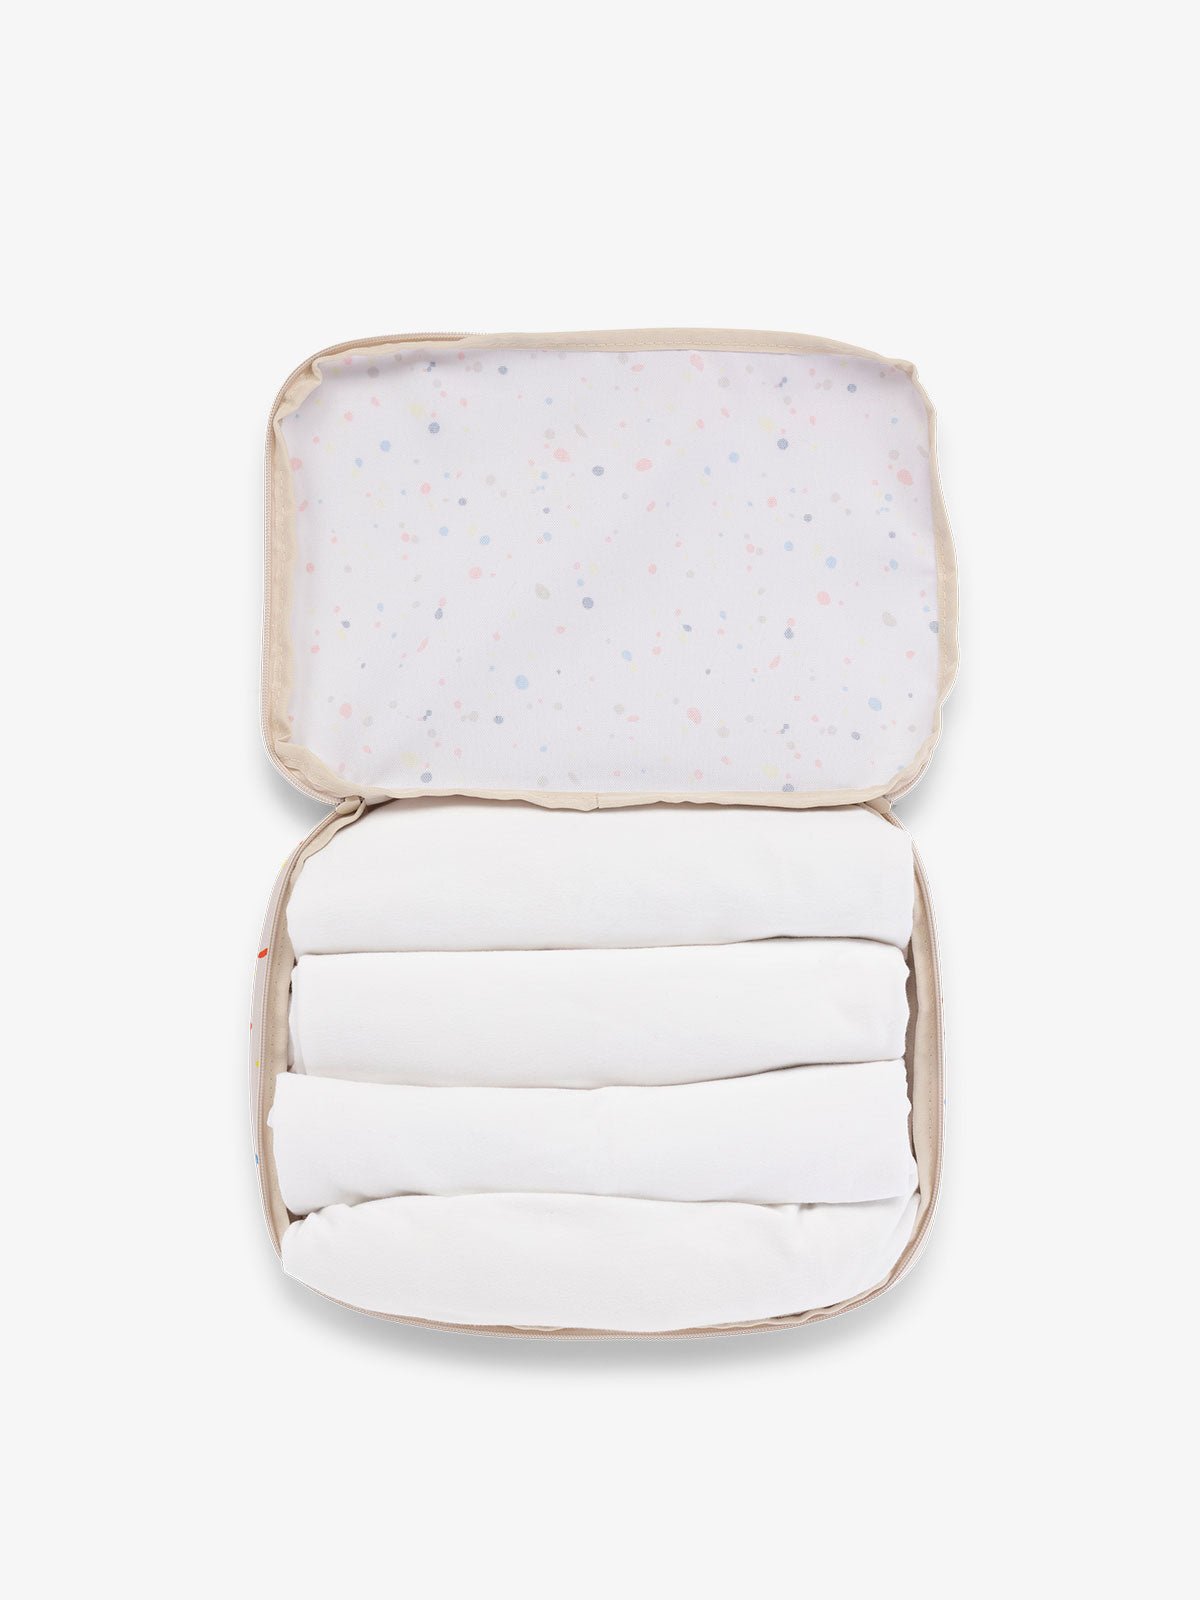 CALPAK packing cubes for travel in speckle